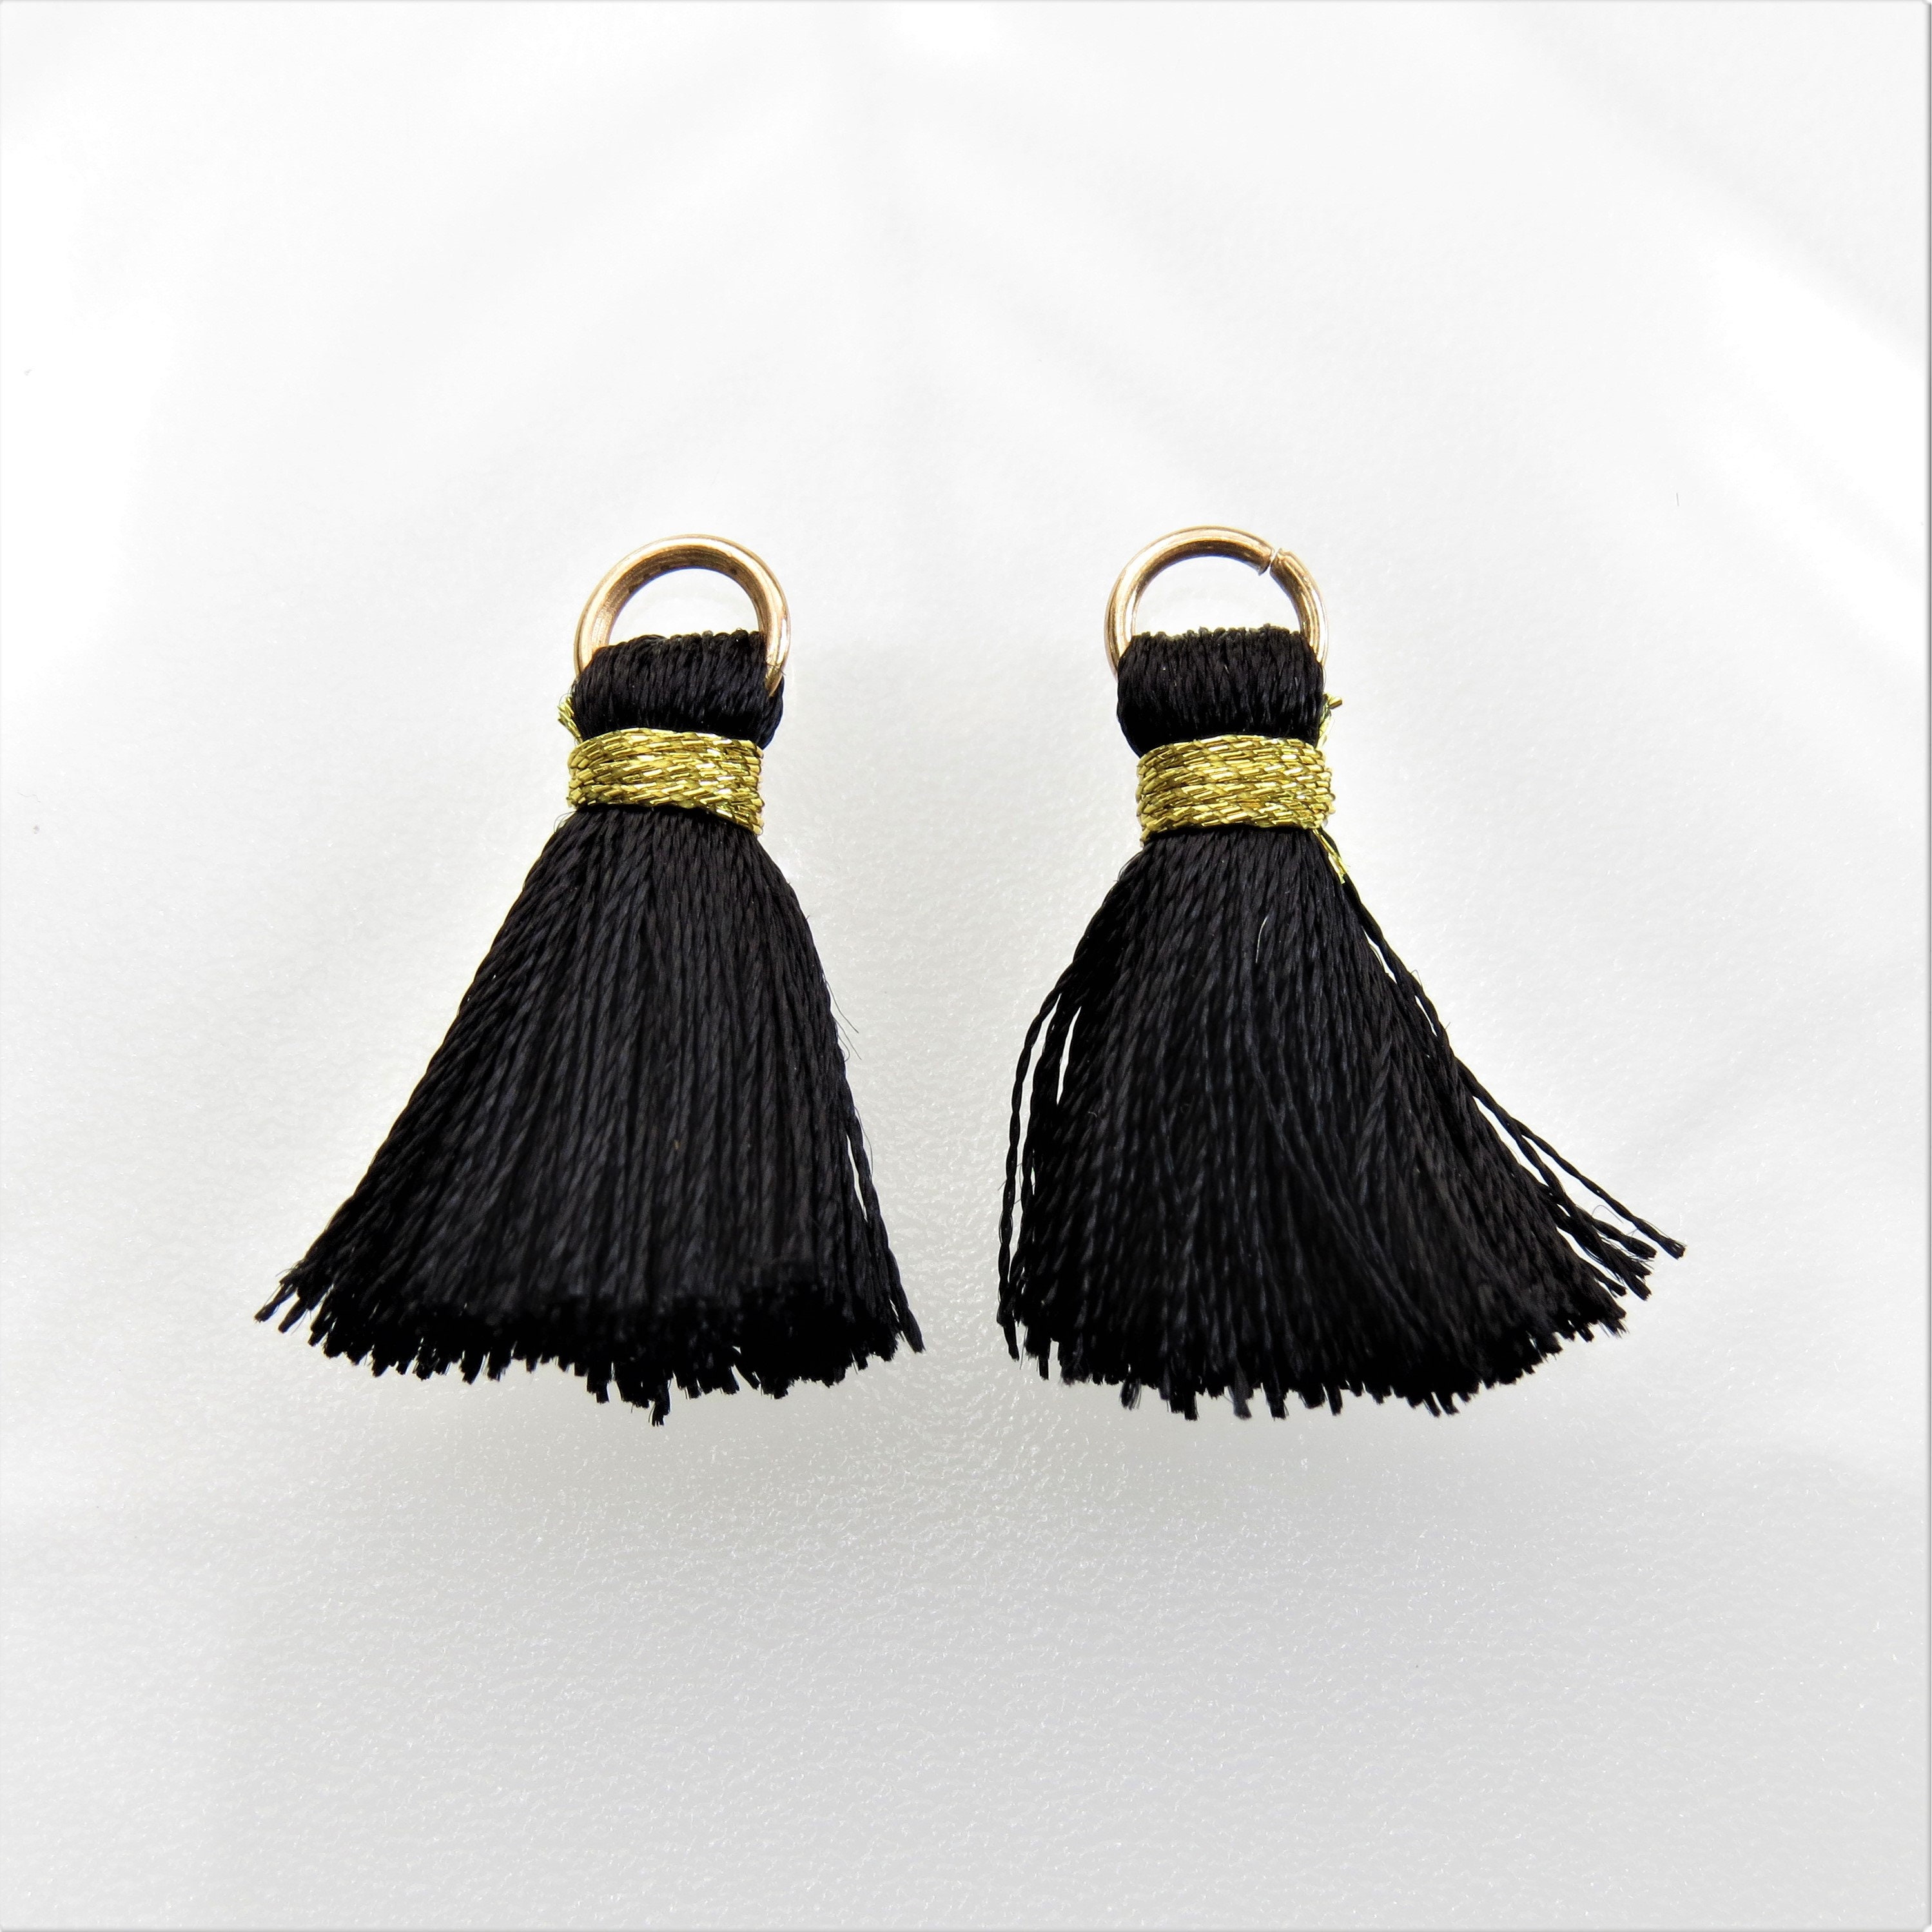 26mm Black Tassels with Gold Tone Jumpring Link/Earring | Etsy